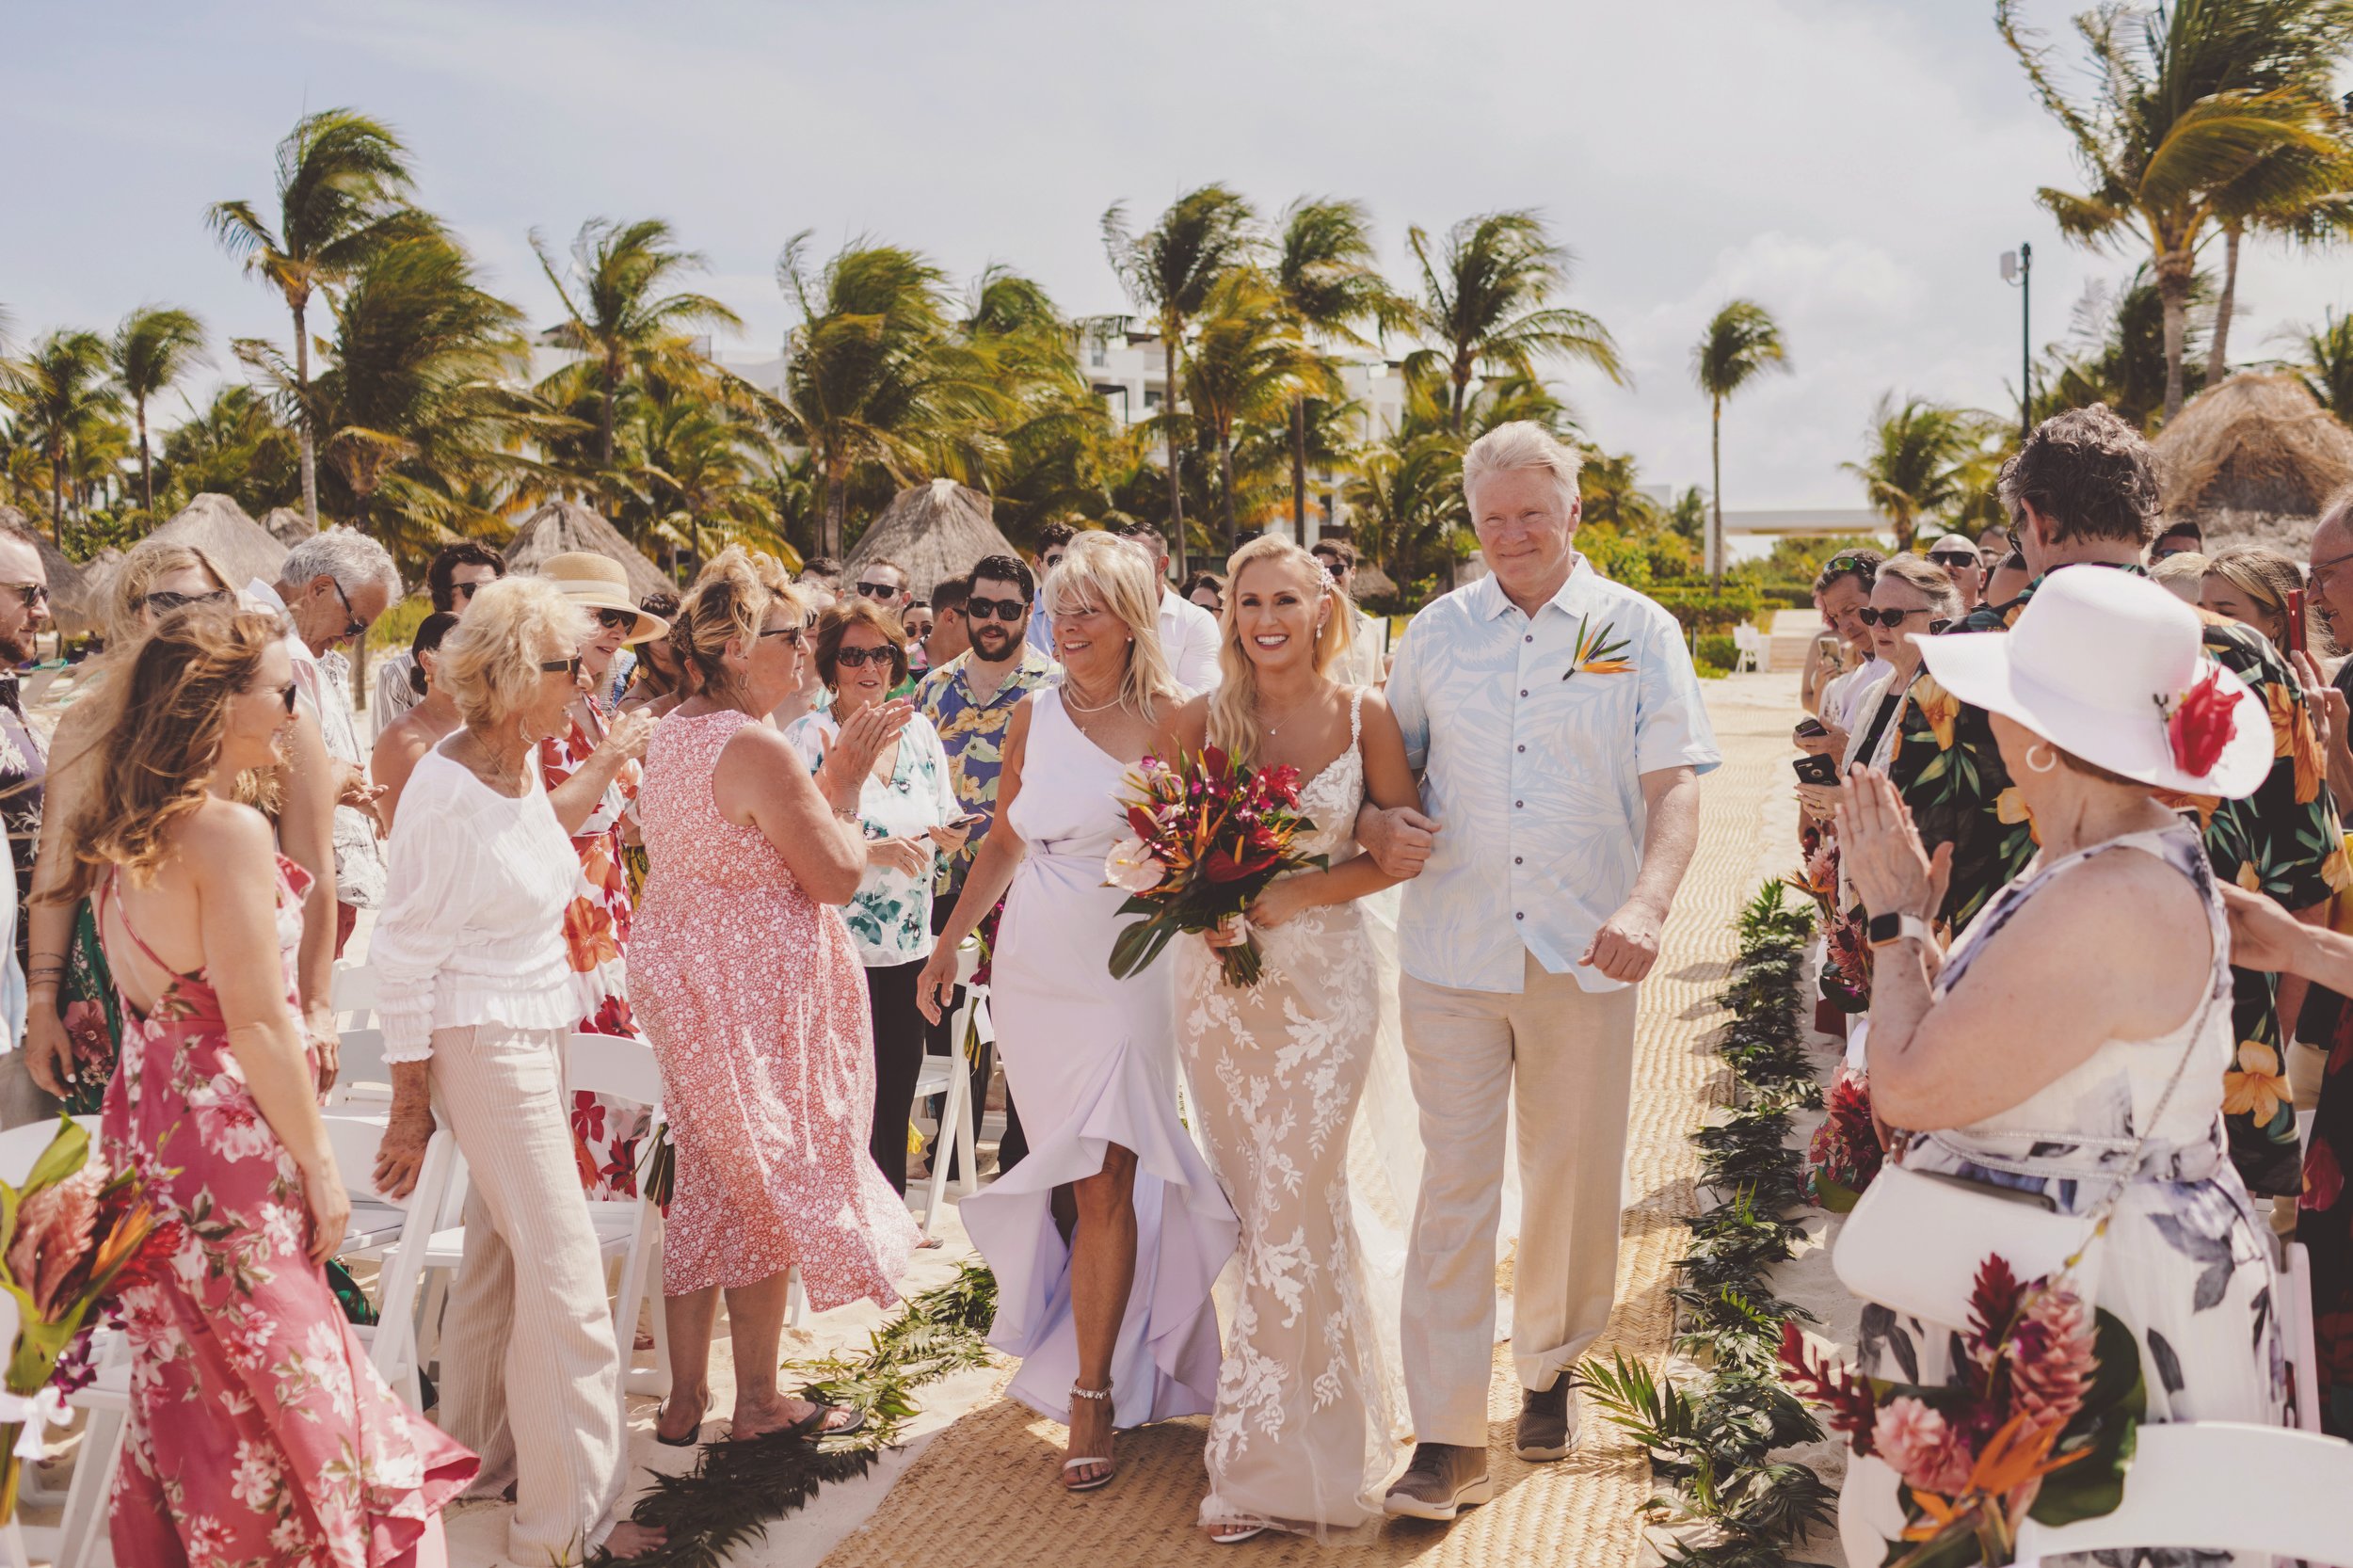 Mother and father walking bride down aisle at wedding in Cancun.